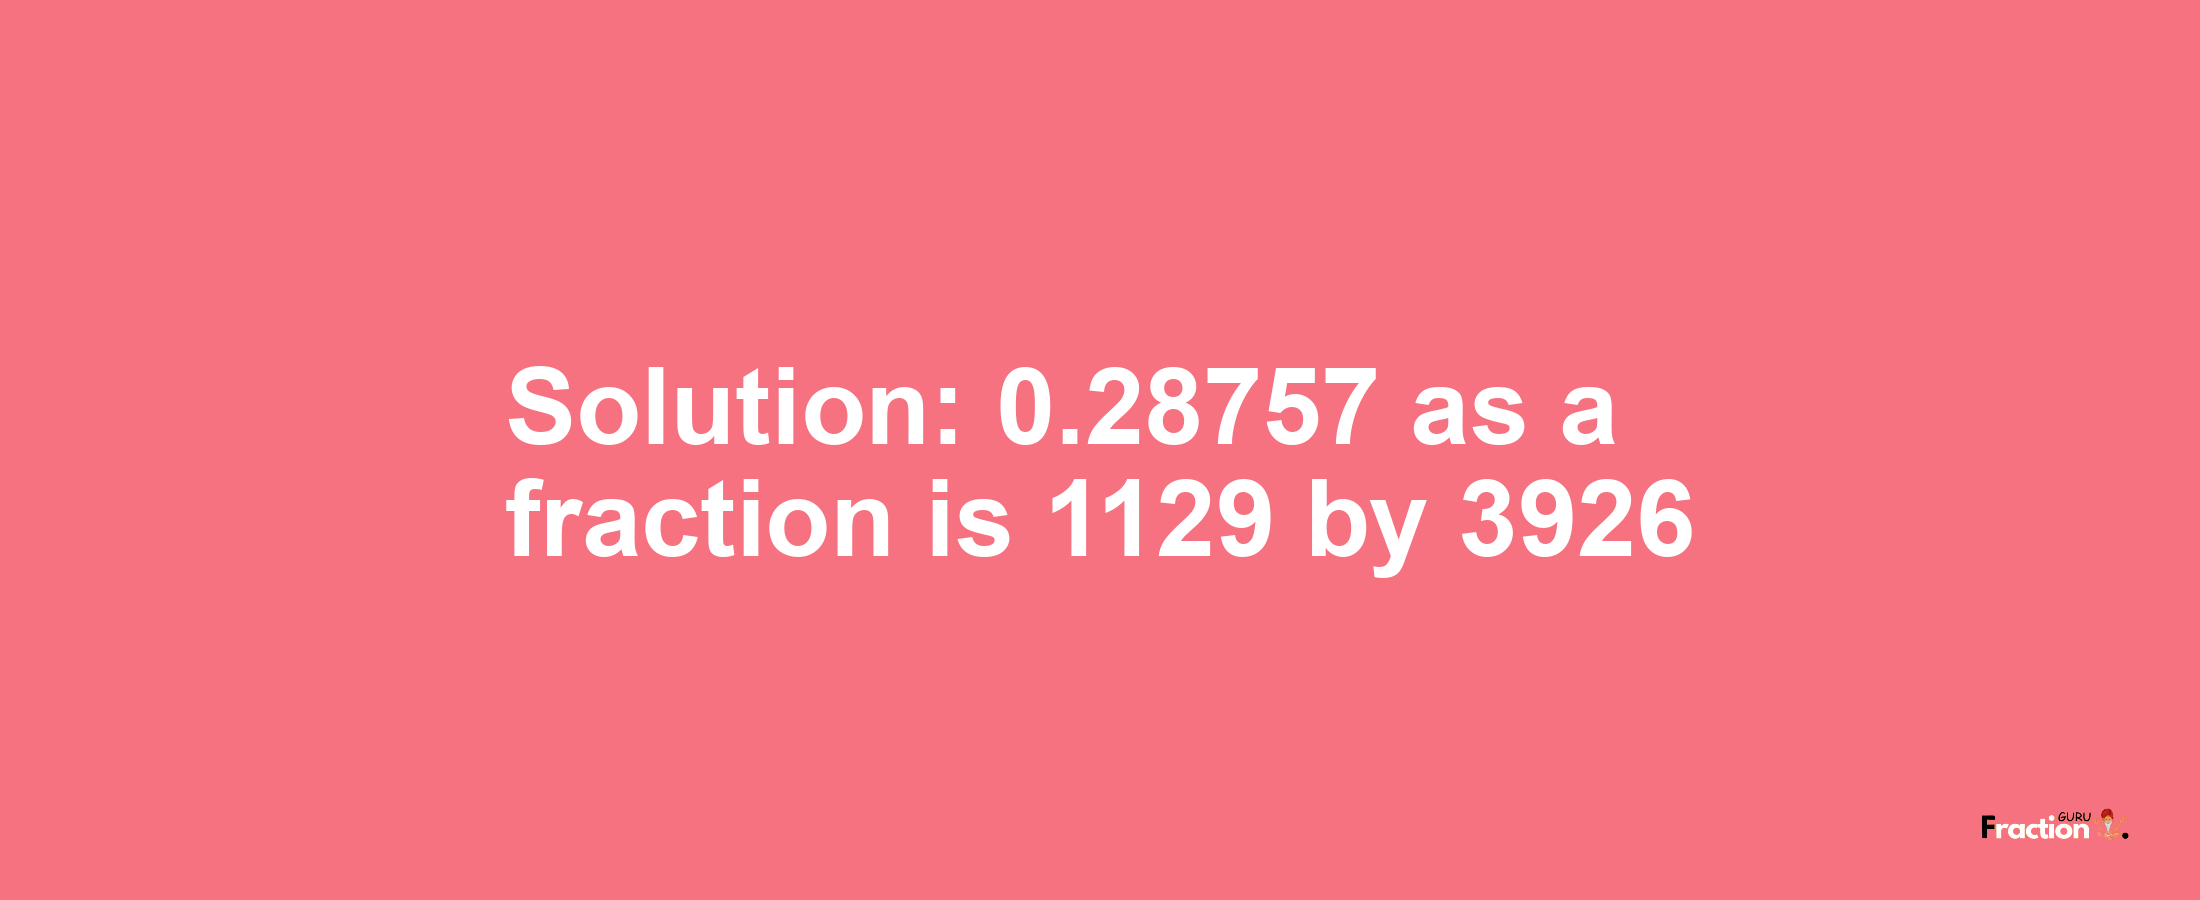 Solution:0.28757 as a fraction is 1129/3926